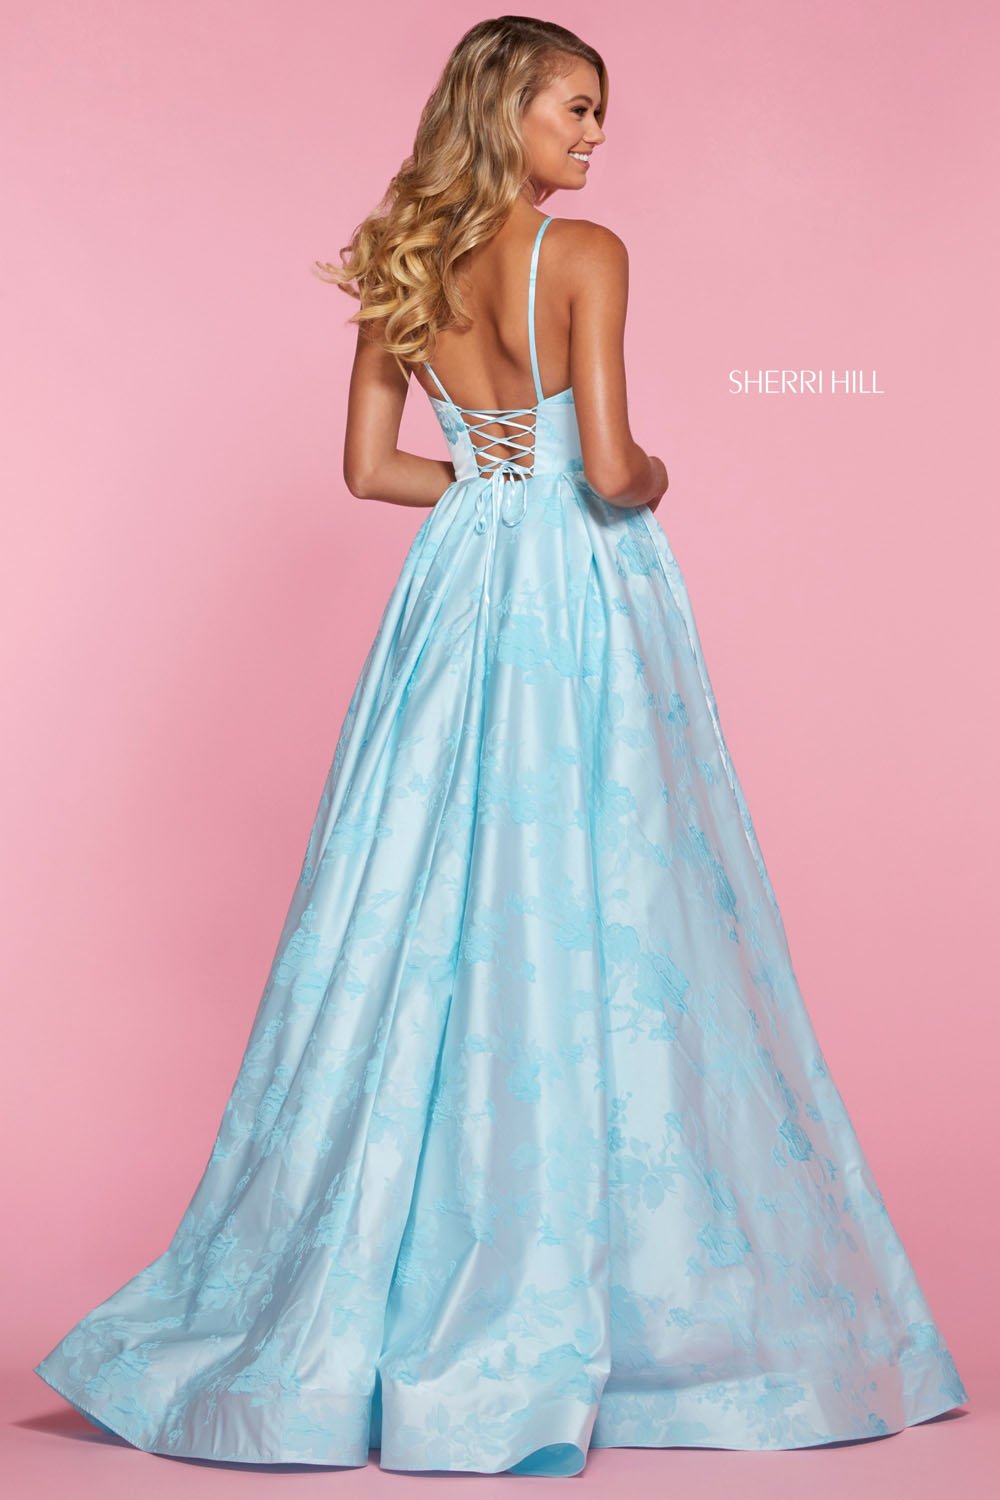 Sherri Hill 53900 dress images in these colors: Pink, Yellow, Light Blue.